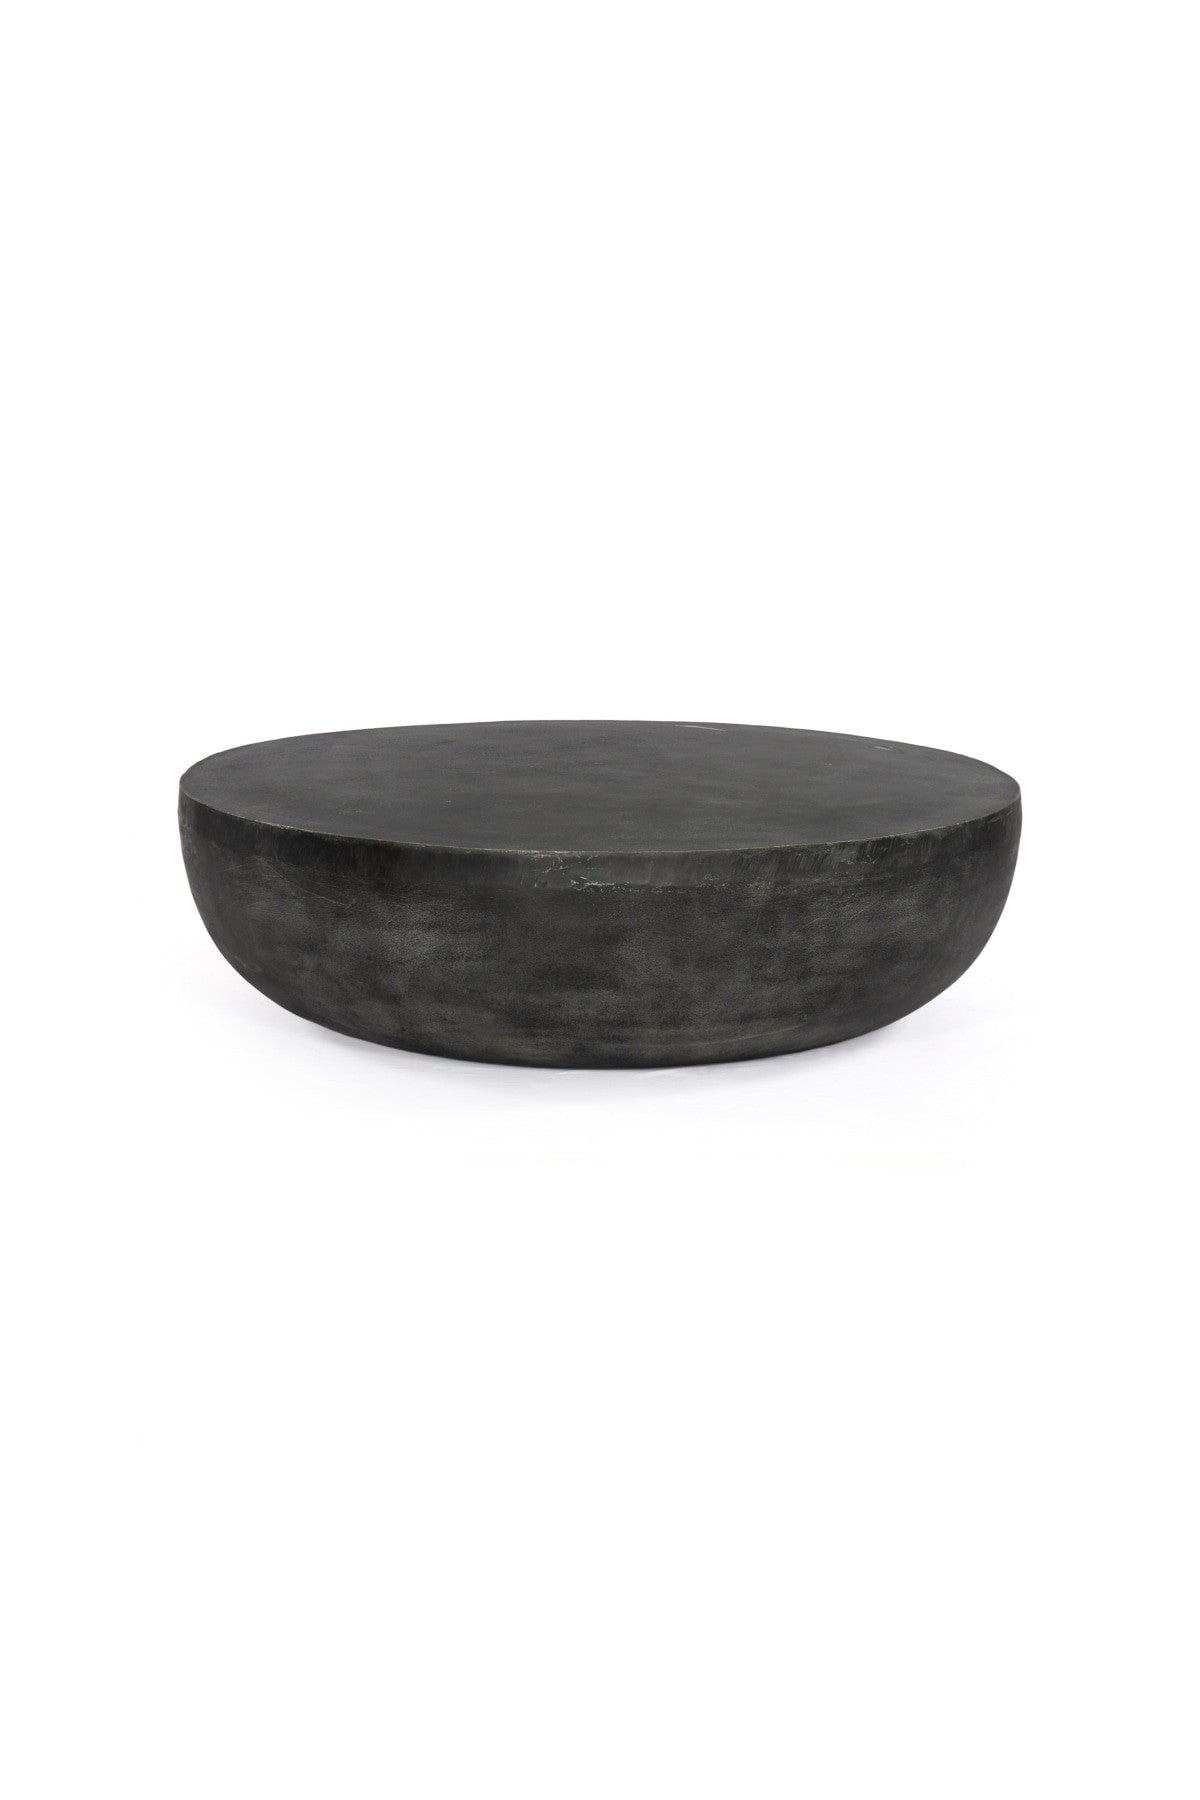 Bastille Outdoor Round Coffee Table - Aged Grey - 2 Sizes